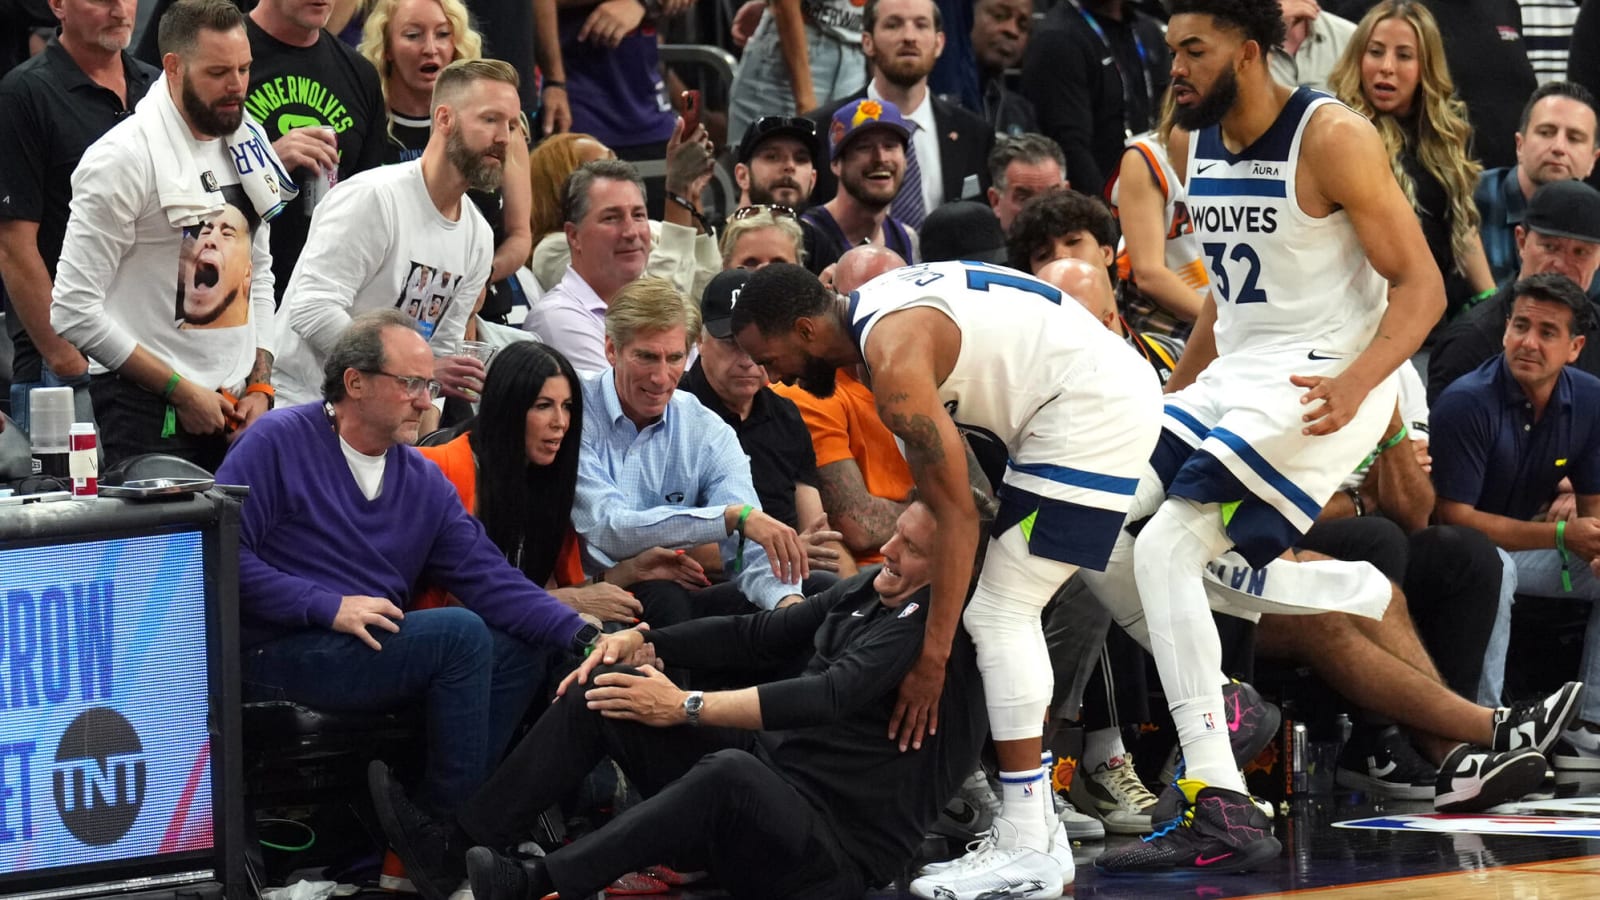 Wolves coach had funny demand after Mike Conley injured him